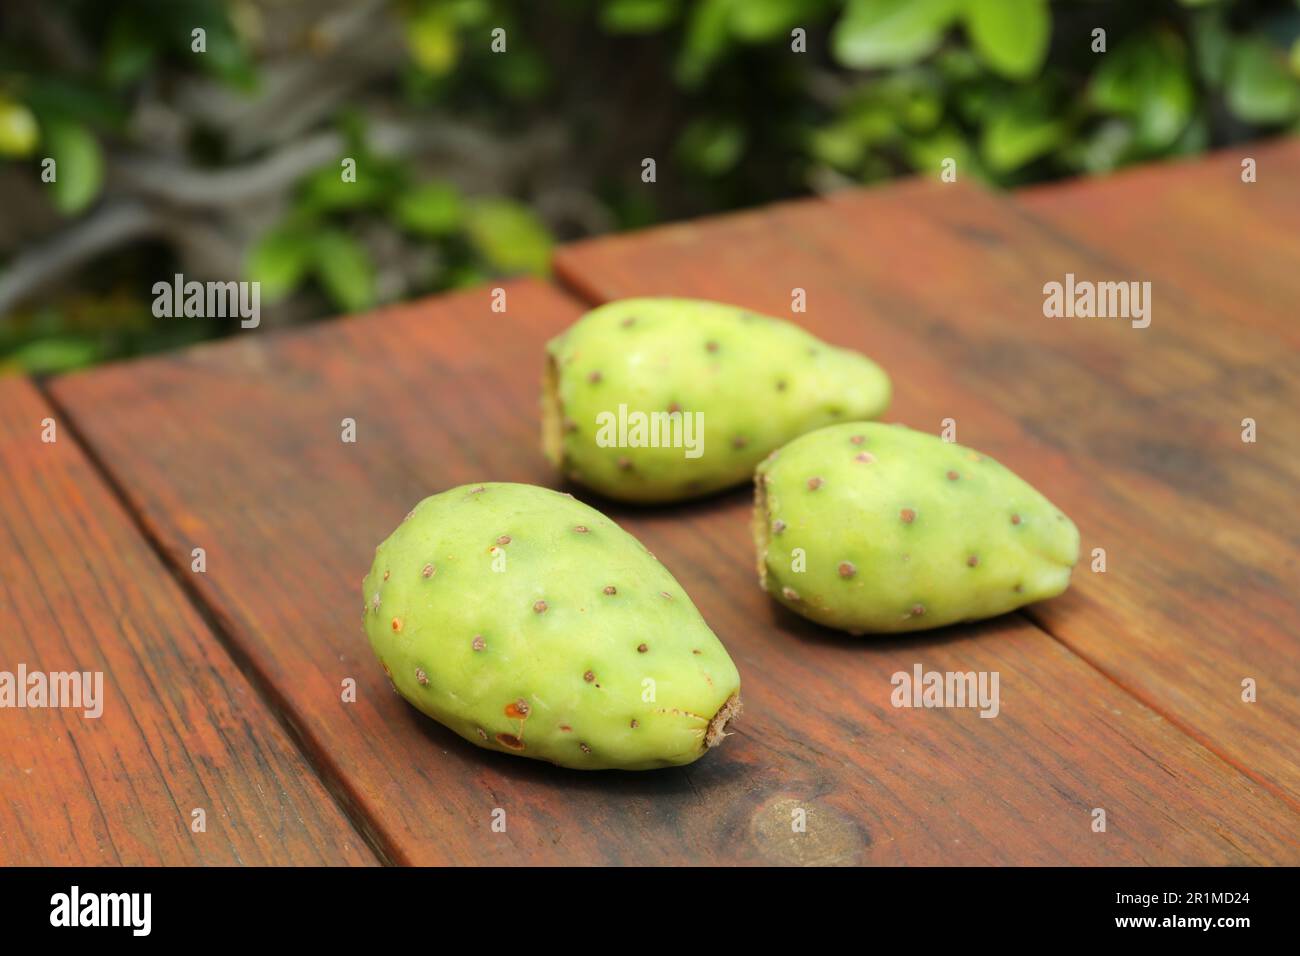 Tasty prickly pear fruits on wooden table outdoors Stock Photo